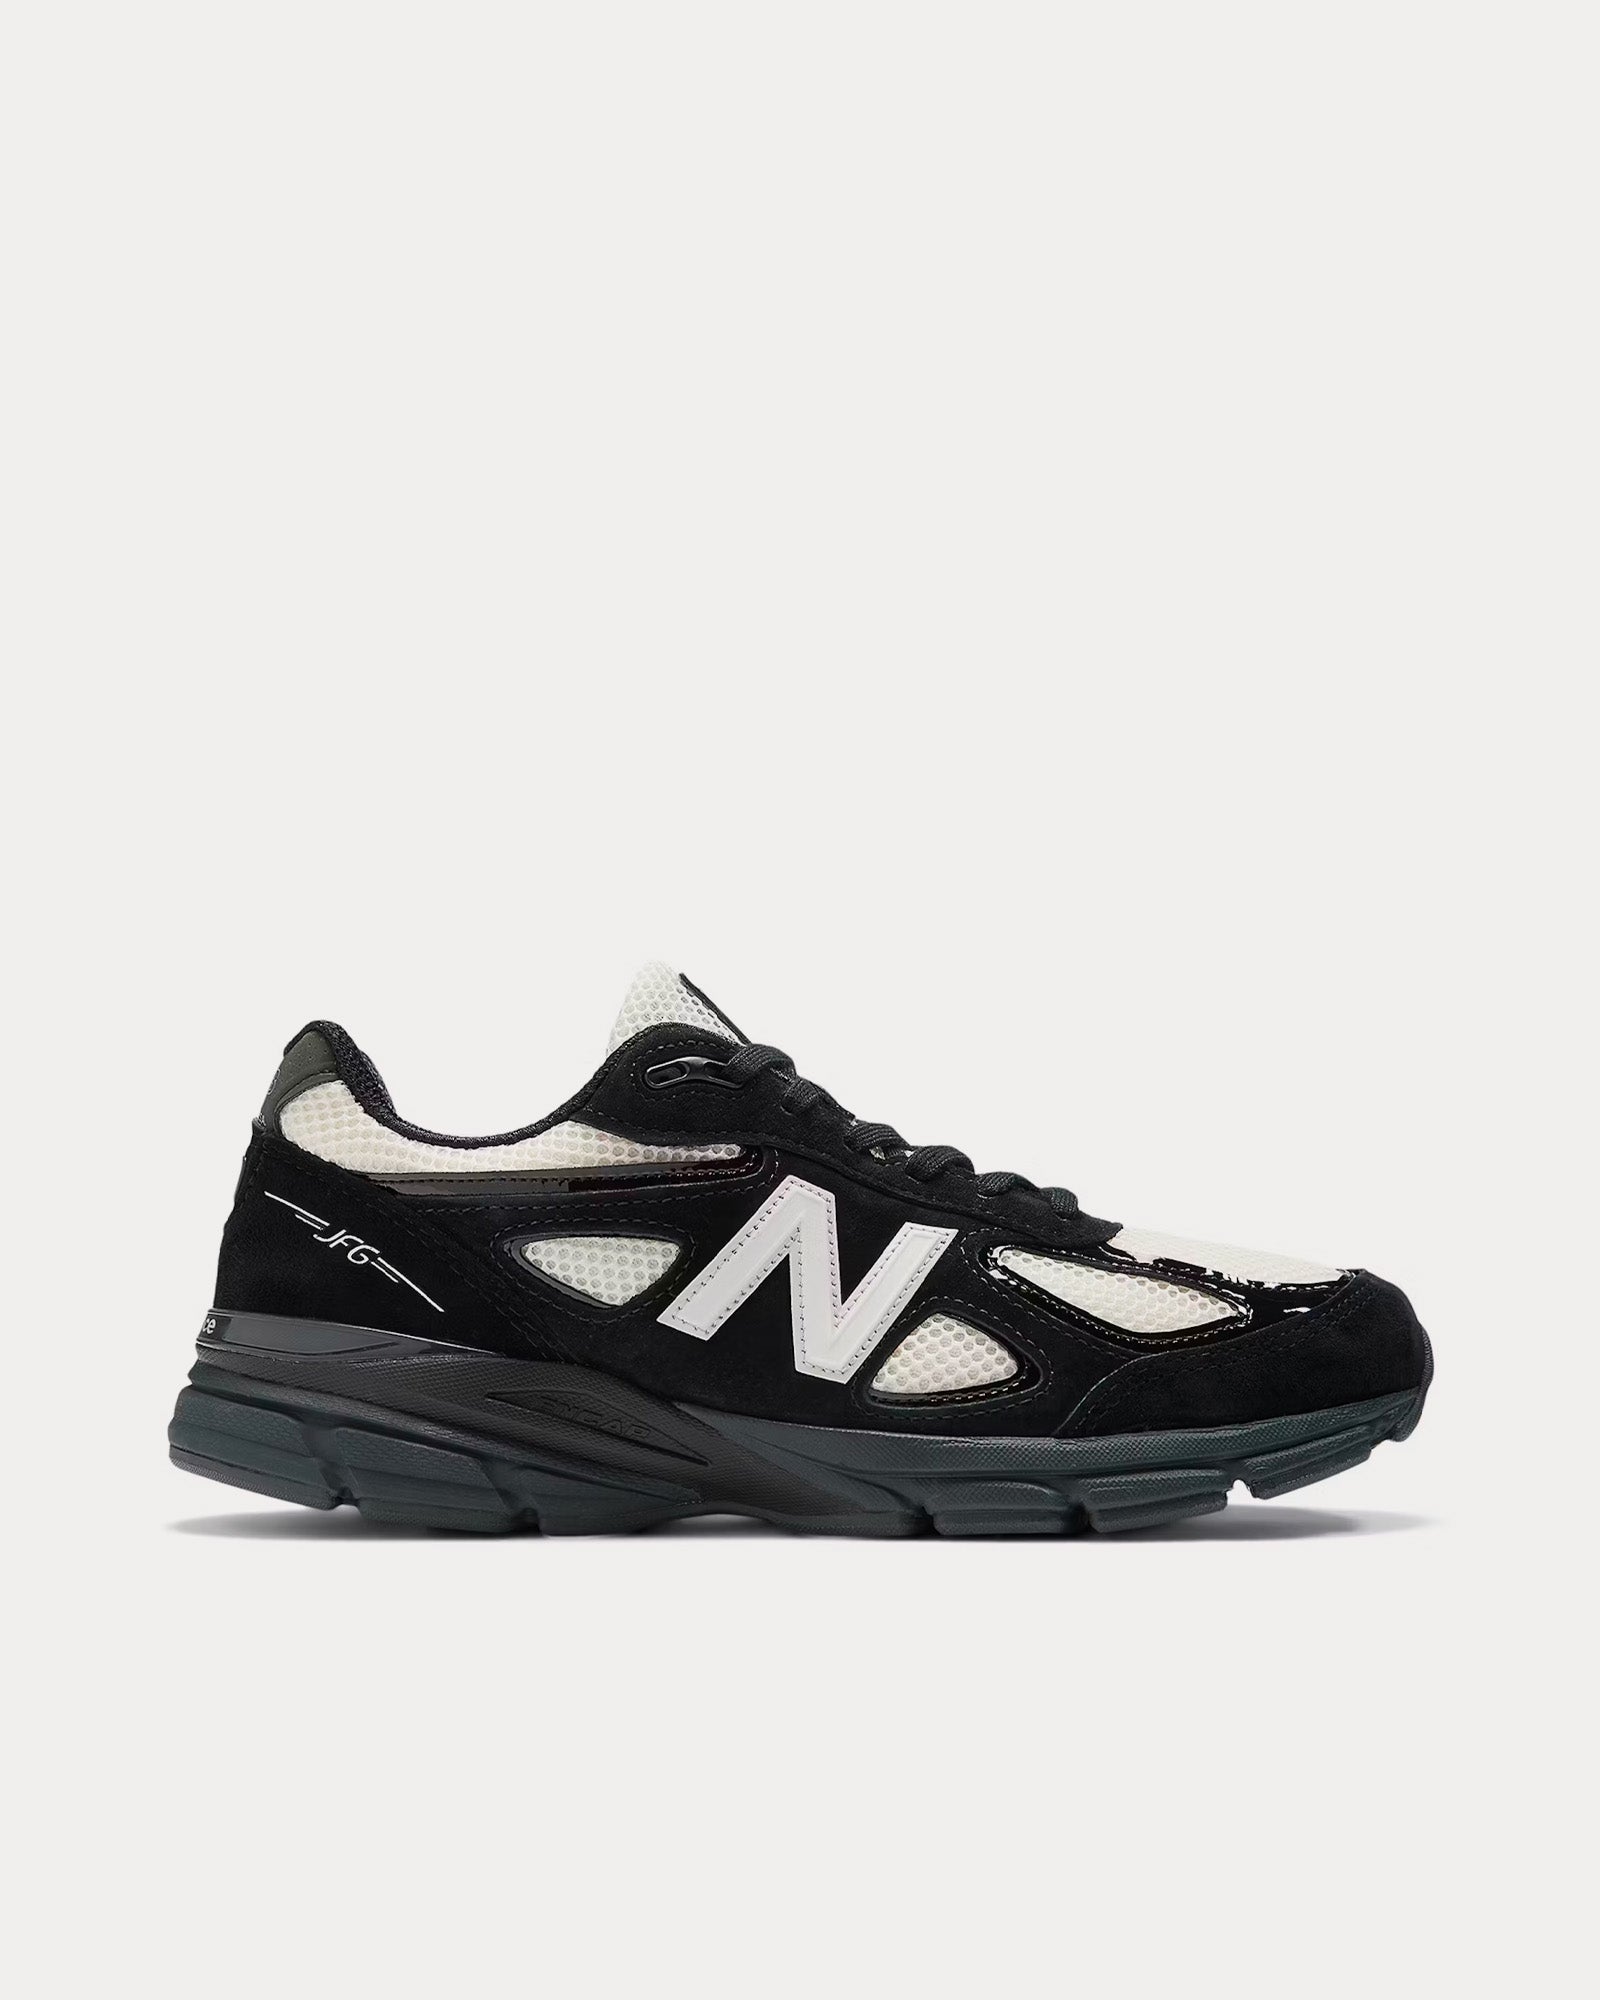 New Balance x Joe Freshgoods - Made in USA 990v4 'Outro' Black / White Low Top Sneakers